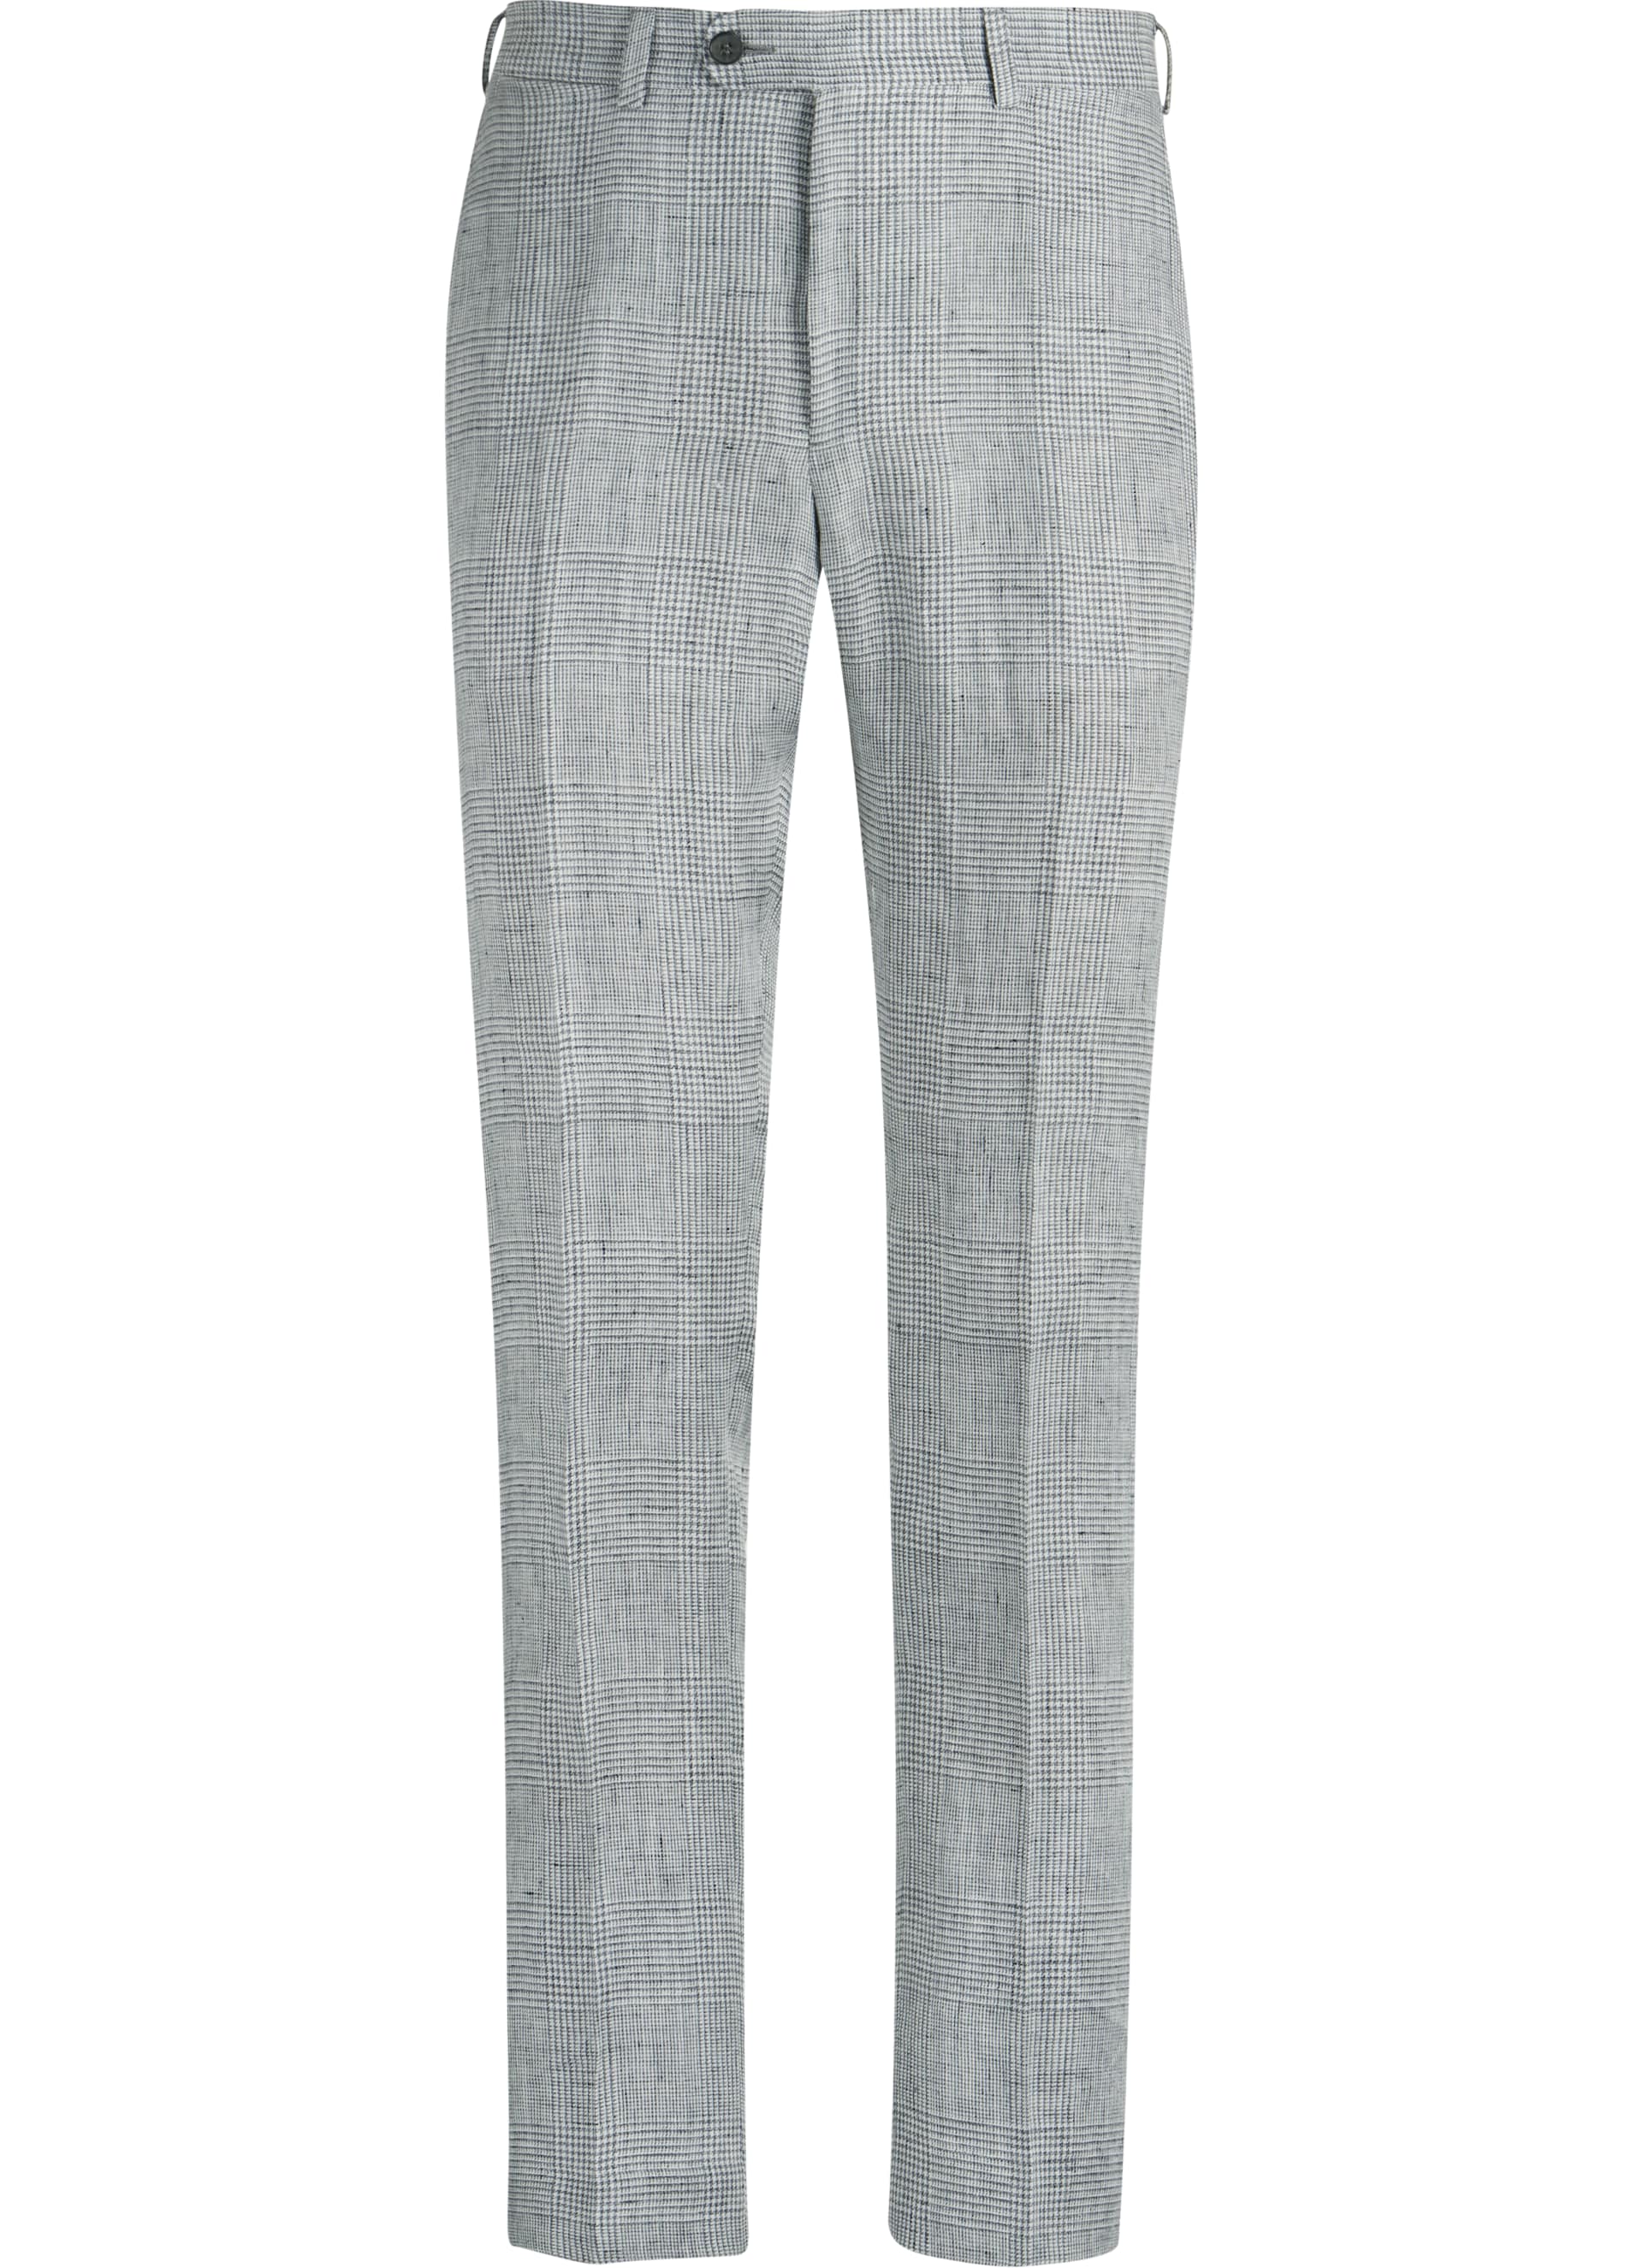 Light Grey Trousers B933i | Suitsupply Online Store